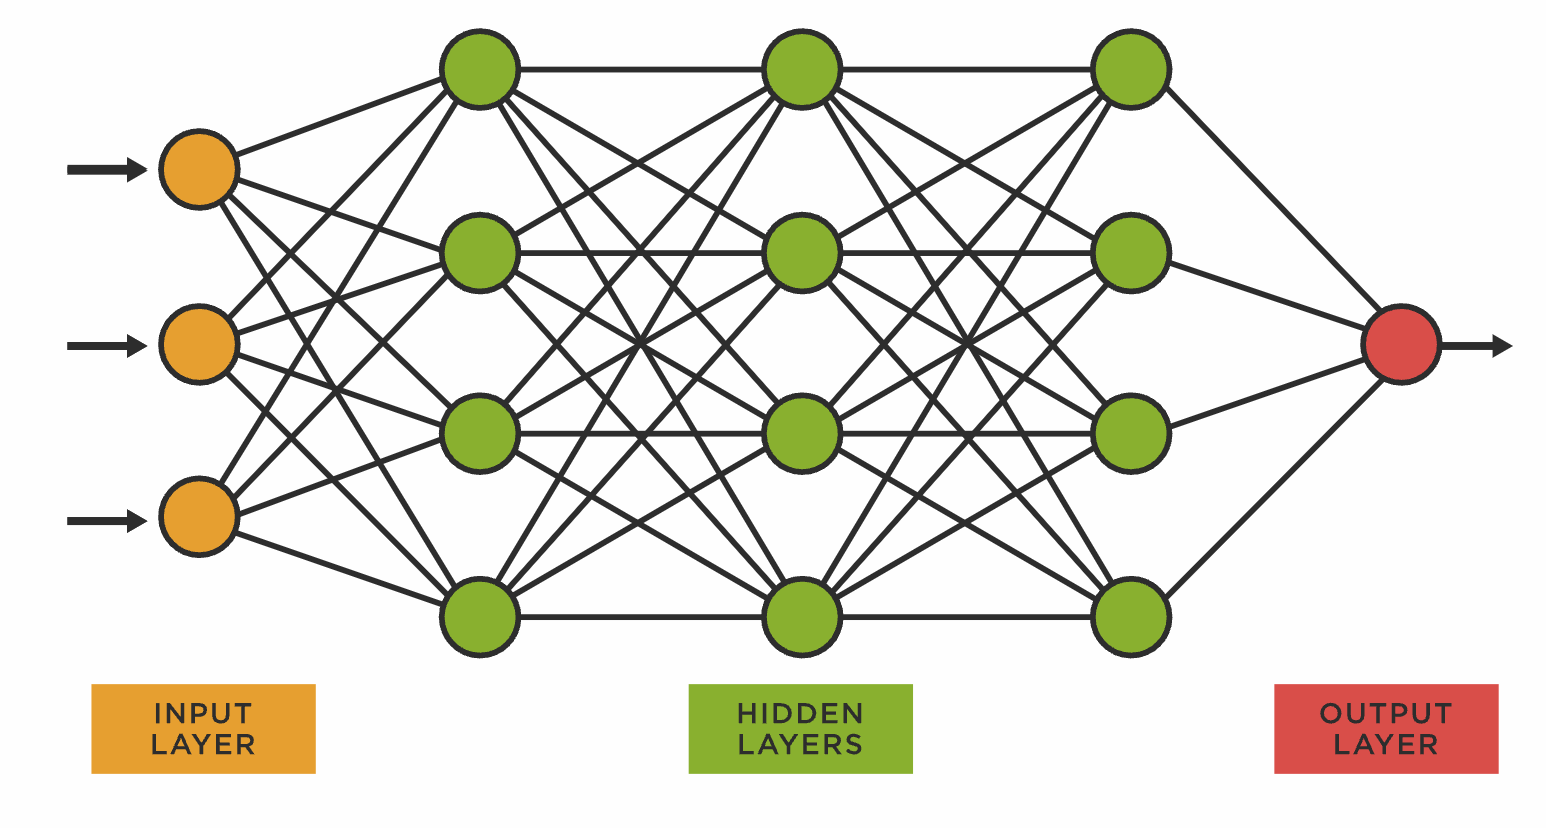 An image showing how a neural network is mapped.